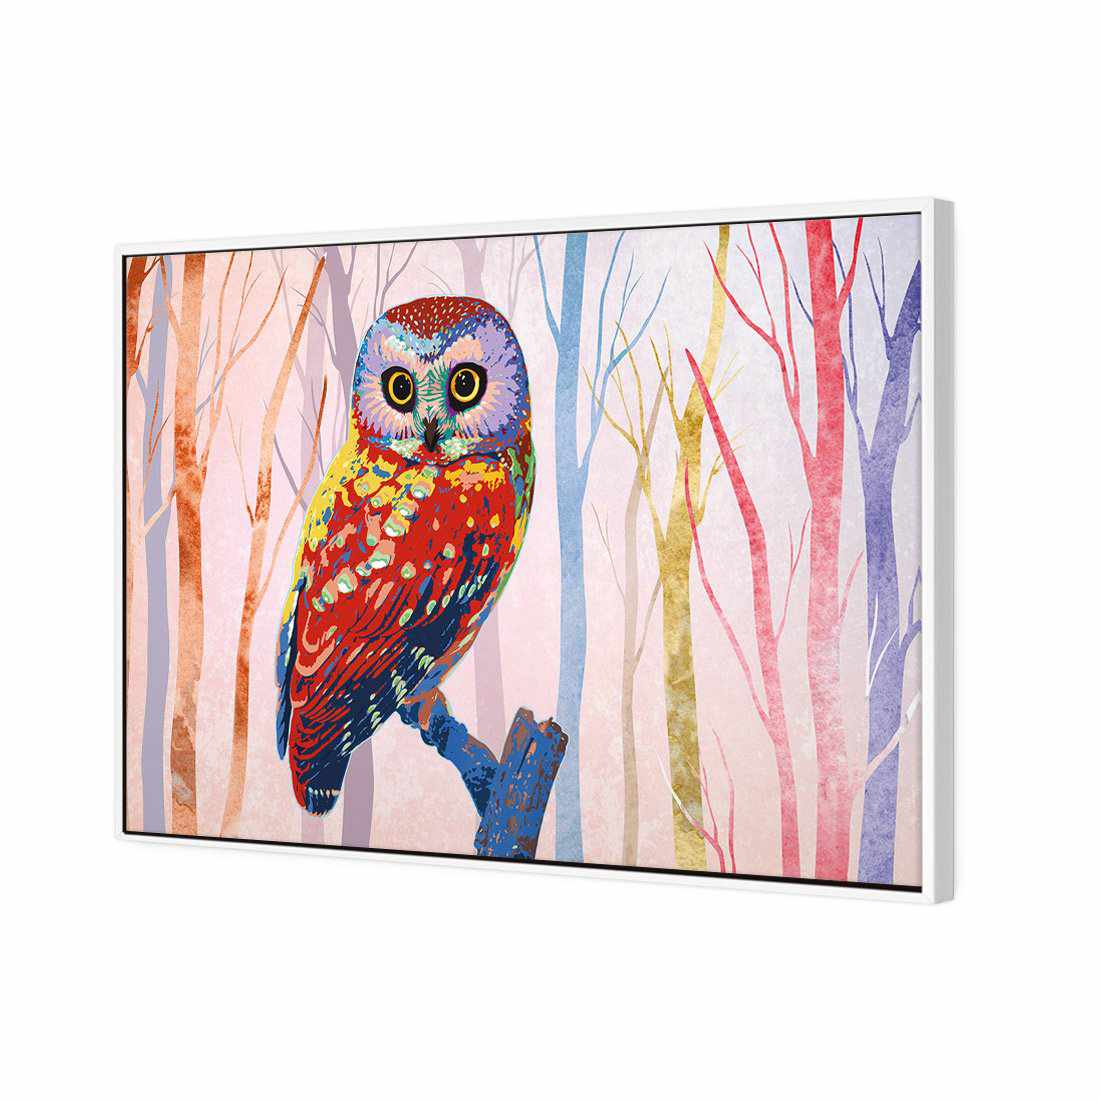 Bright Wise Owl, Light Canvas Art-Canvas-Wall Art Designs-45x30cm-Canvas - White Frame-Wall Art Designs